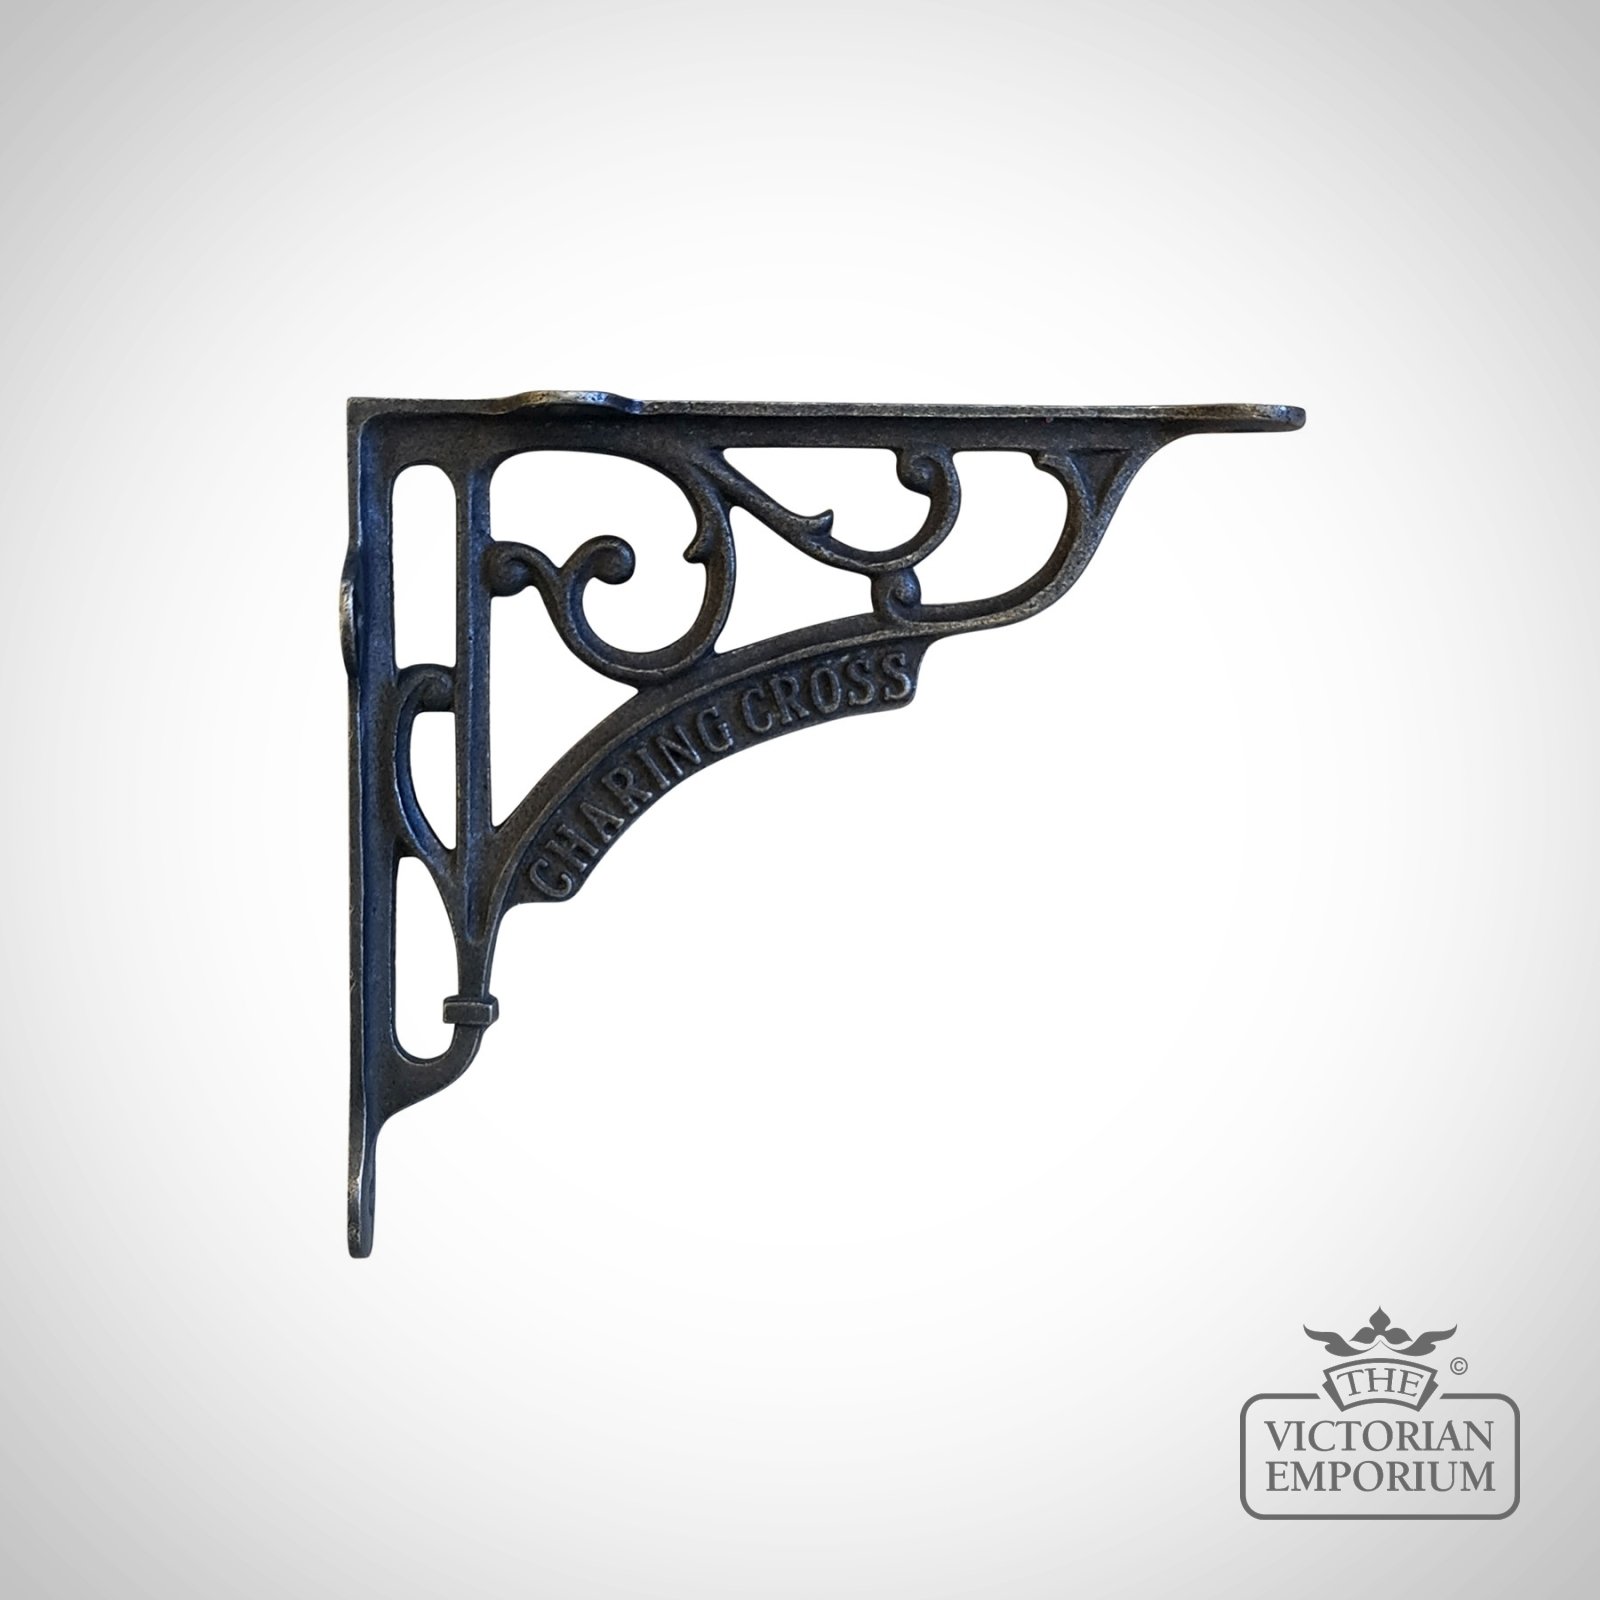 Charing Cross Shelf Bracket in Cast Iron and a choice of Sizes